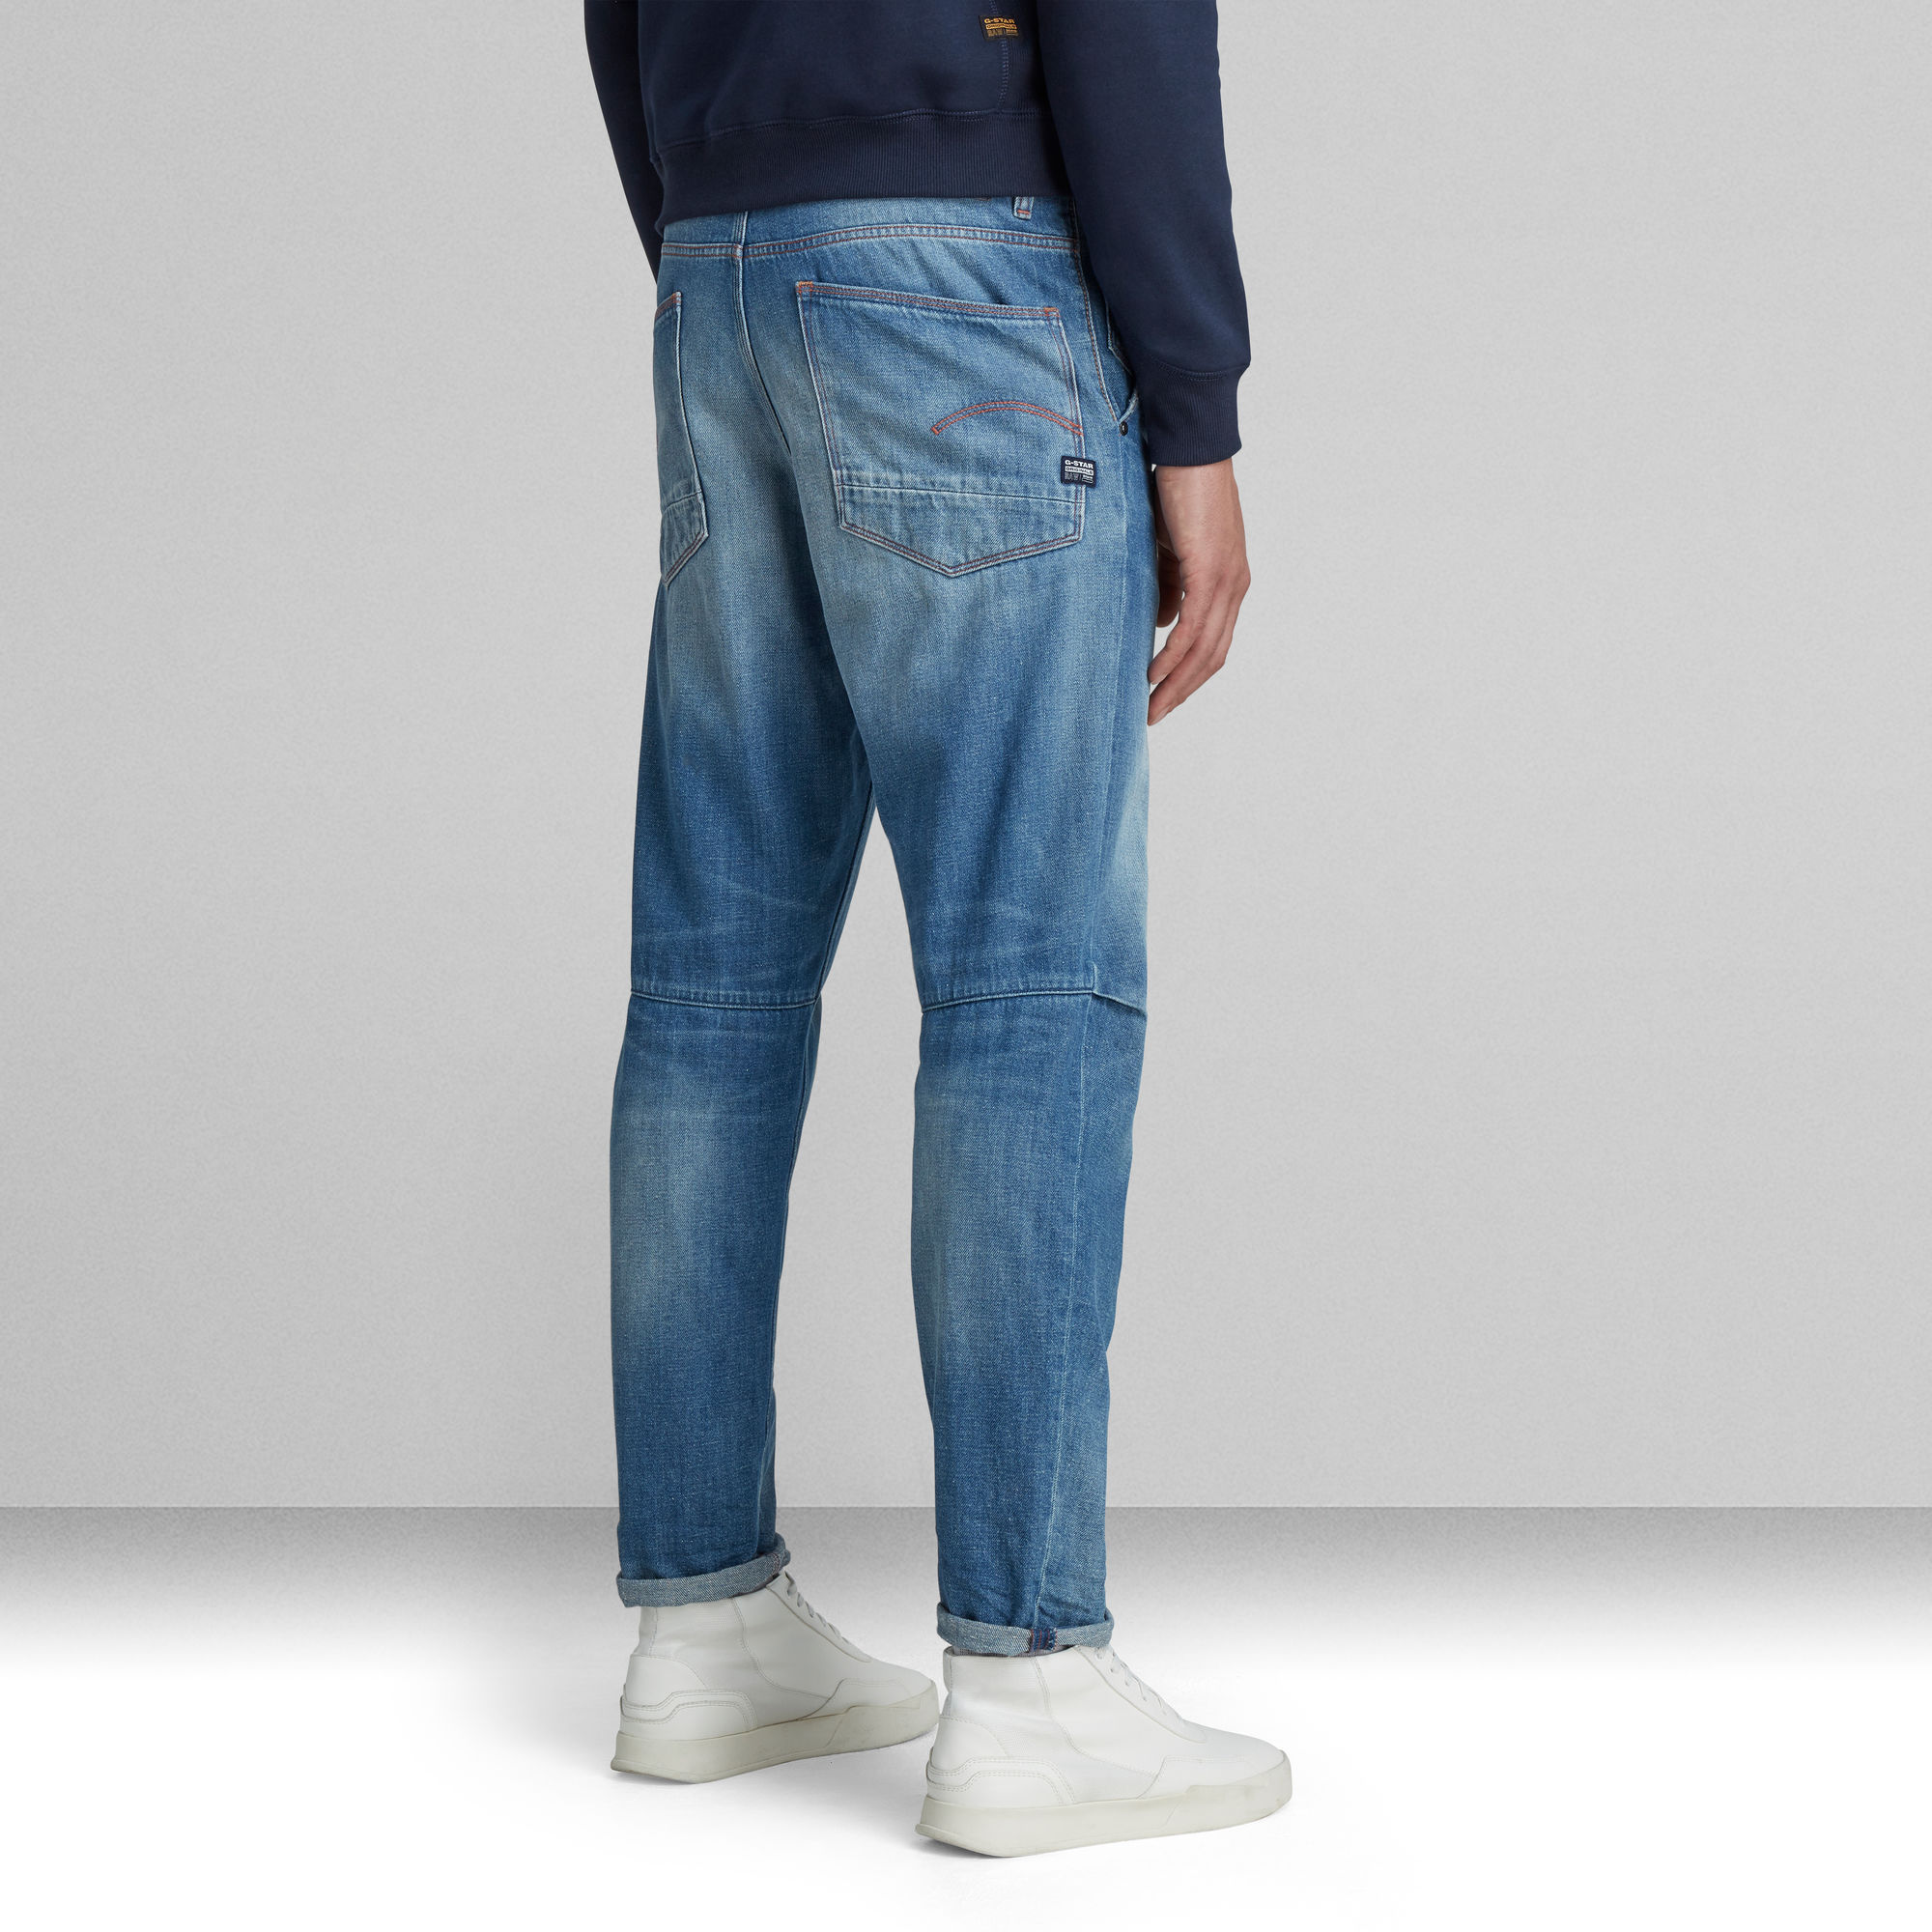 Grip 3D Relaxed Tapered Jeans | Light blue | G-Star RAW®